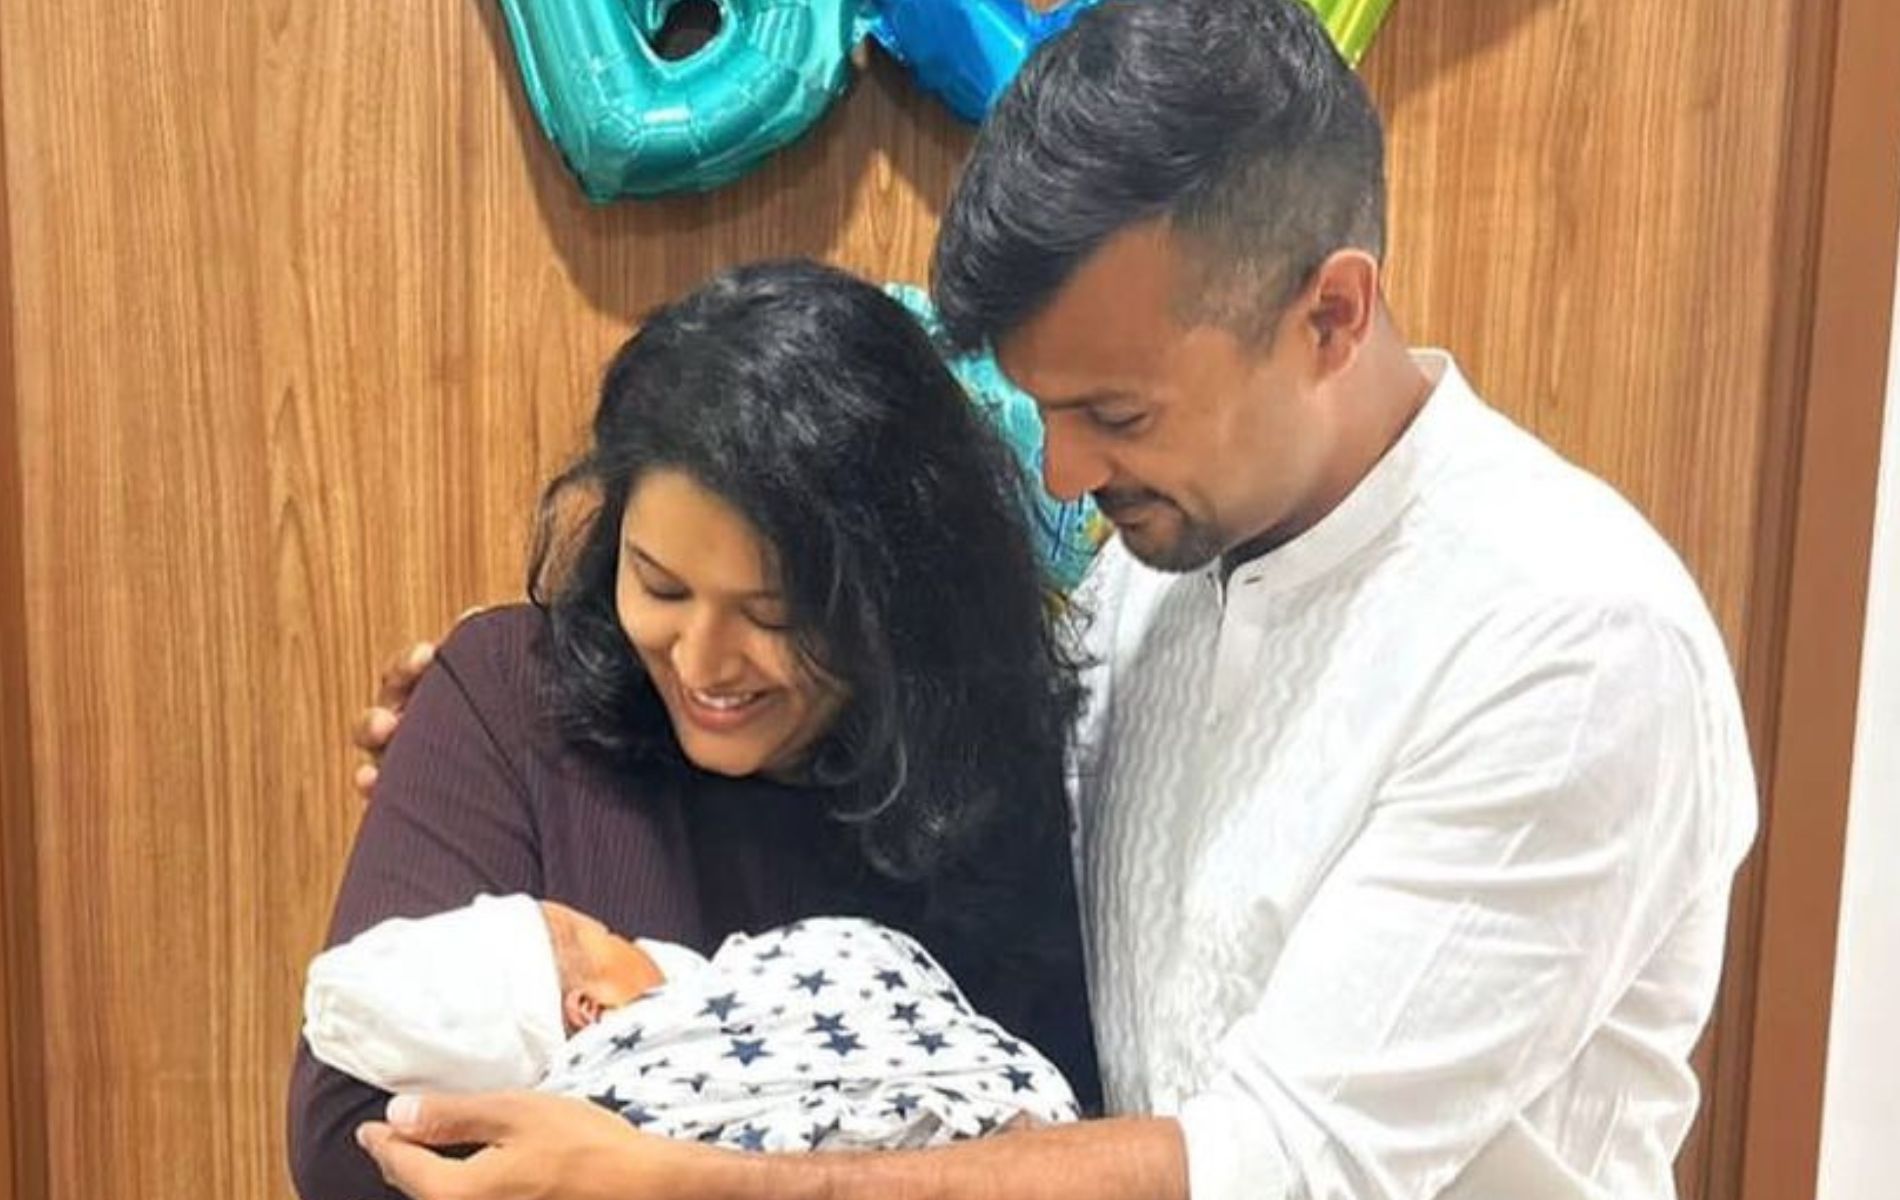 Mayank Agarwali with his wife and newborn baby. (Pic: Instagram)